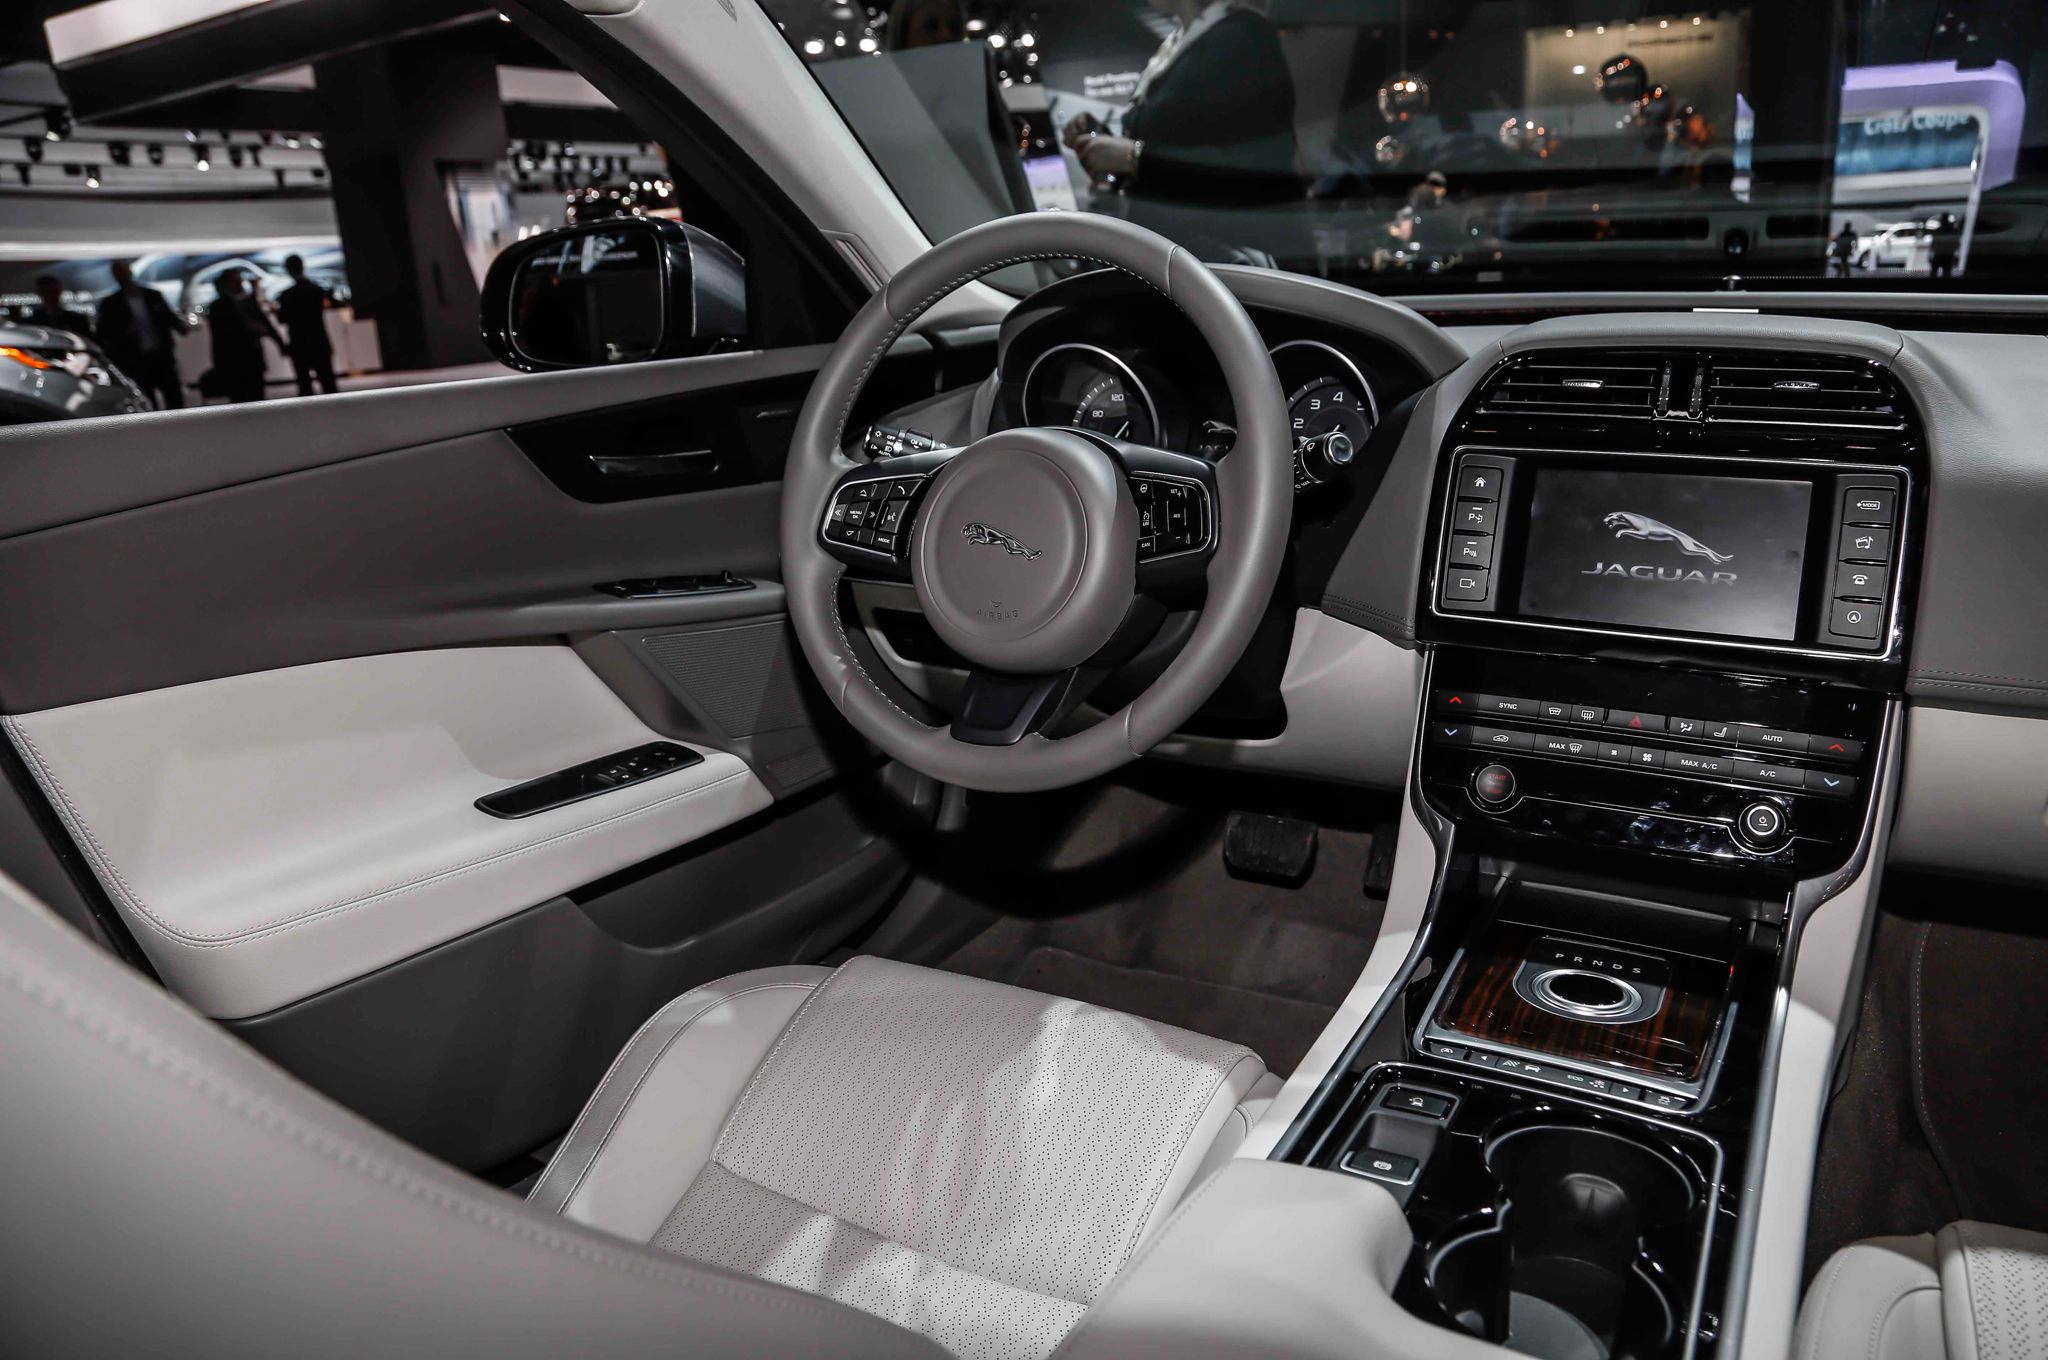 2016 Jaguar Xe Dashboard And Cockpit (View 8 of 12)